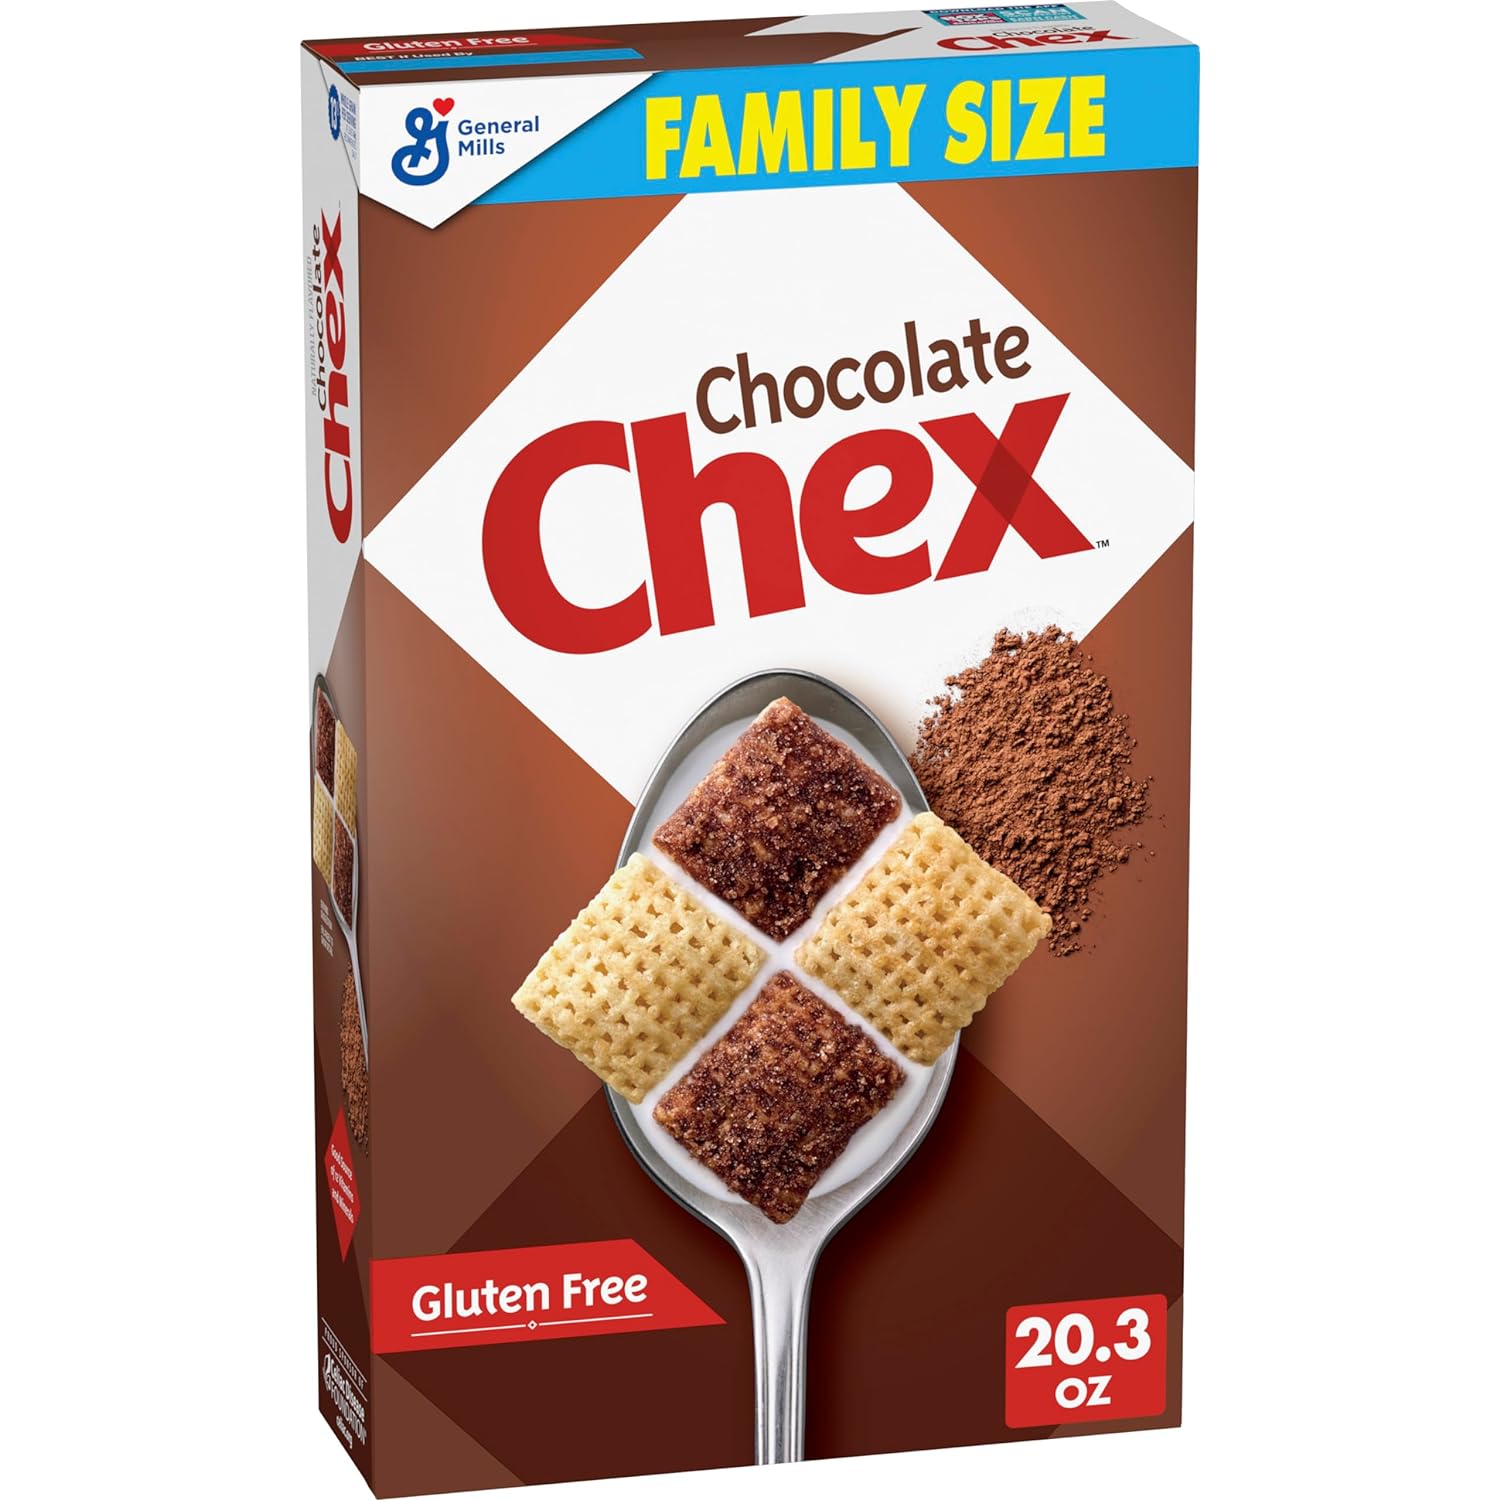 Chocolate Chex Cereal, Gluten Free Breakfast Cereal, Made with Whole Grain, Family Size, 20.3 oz